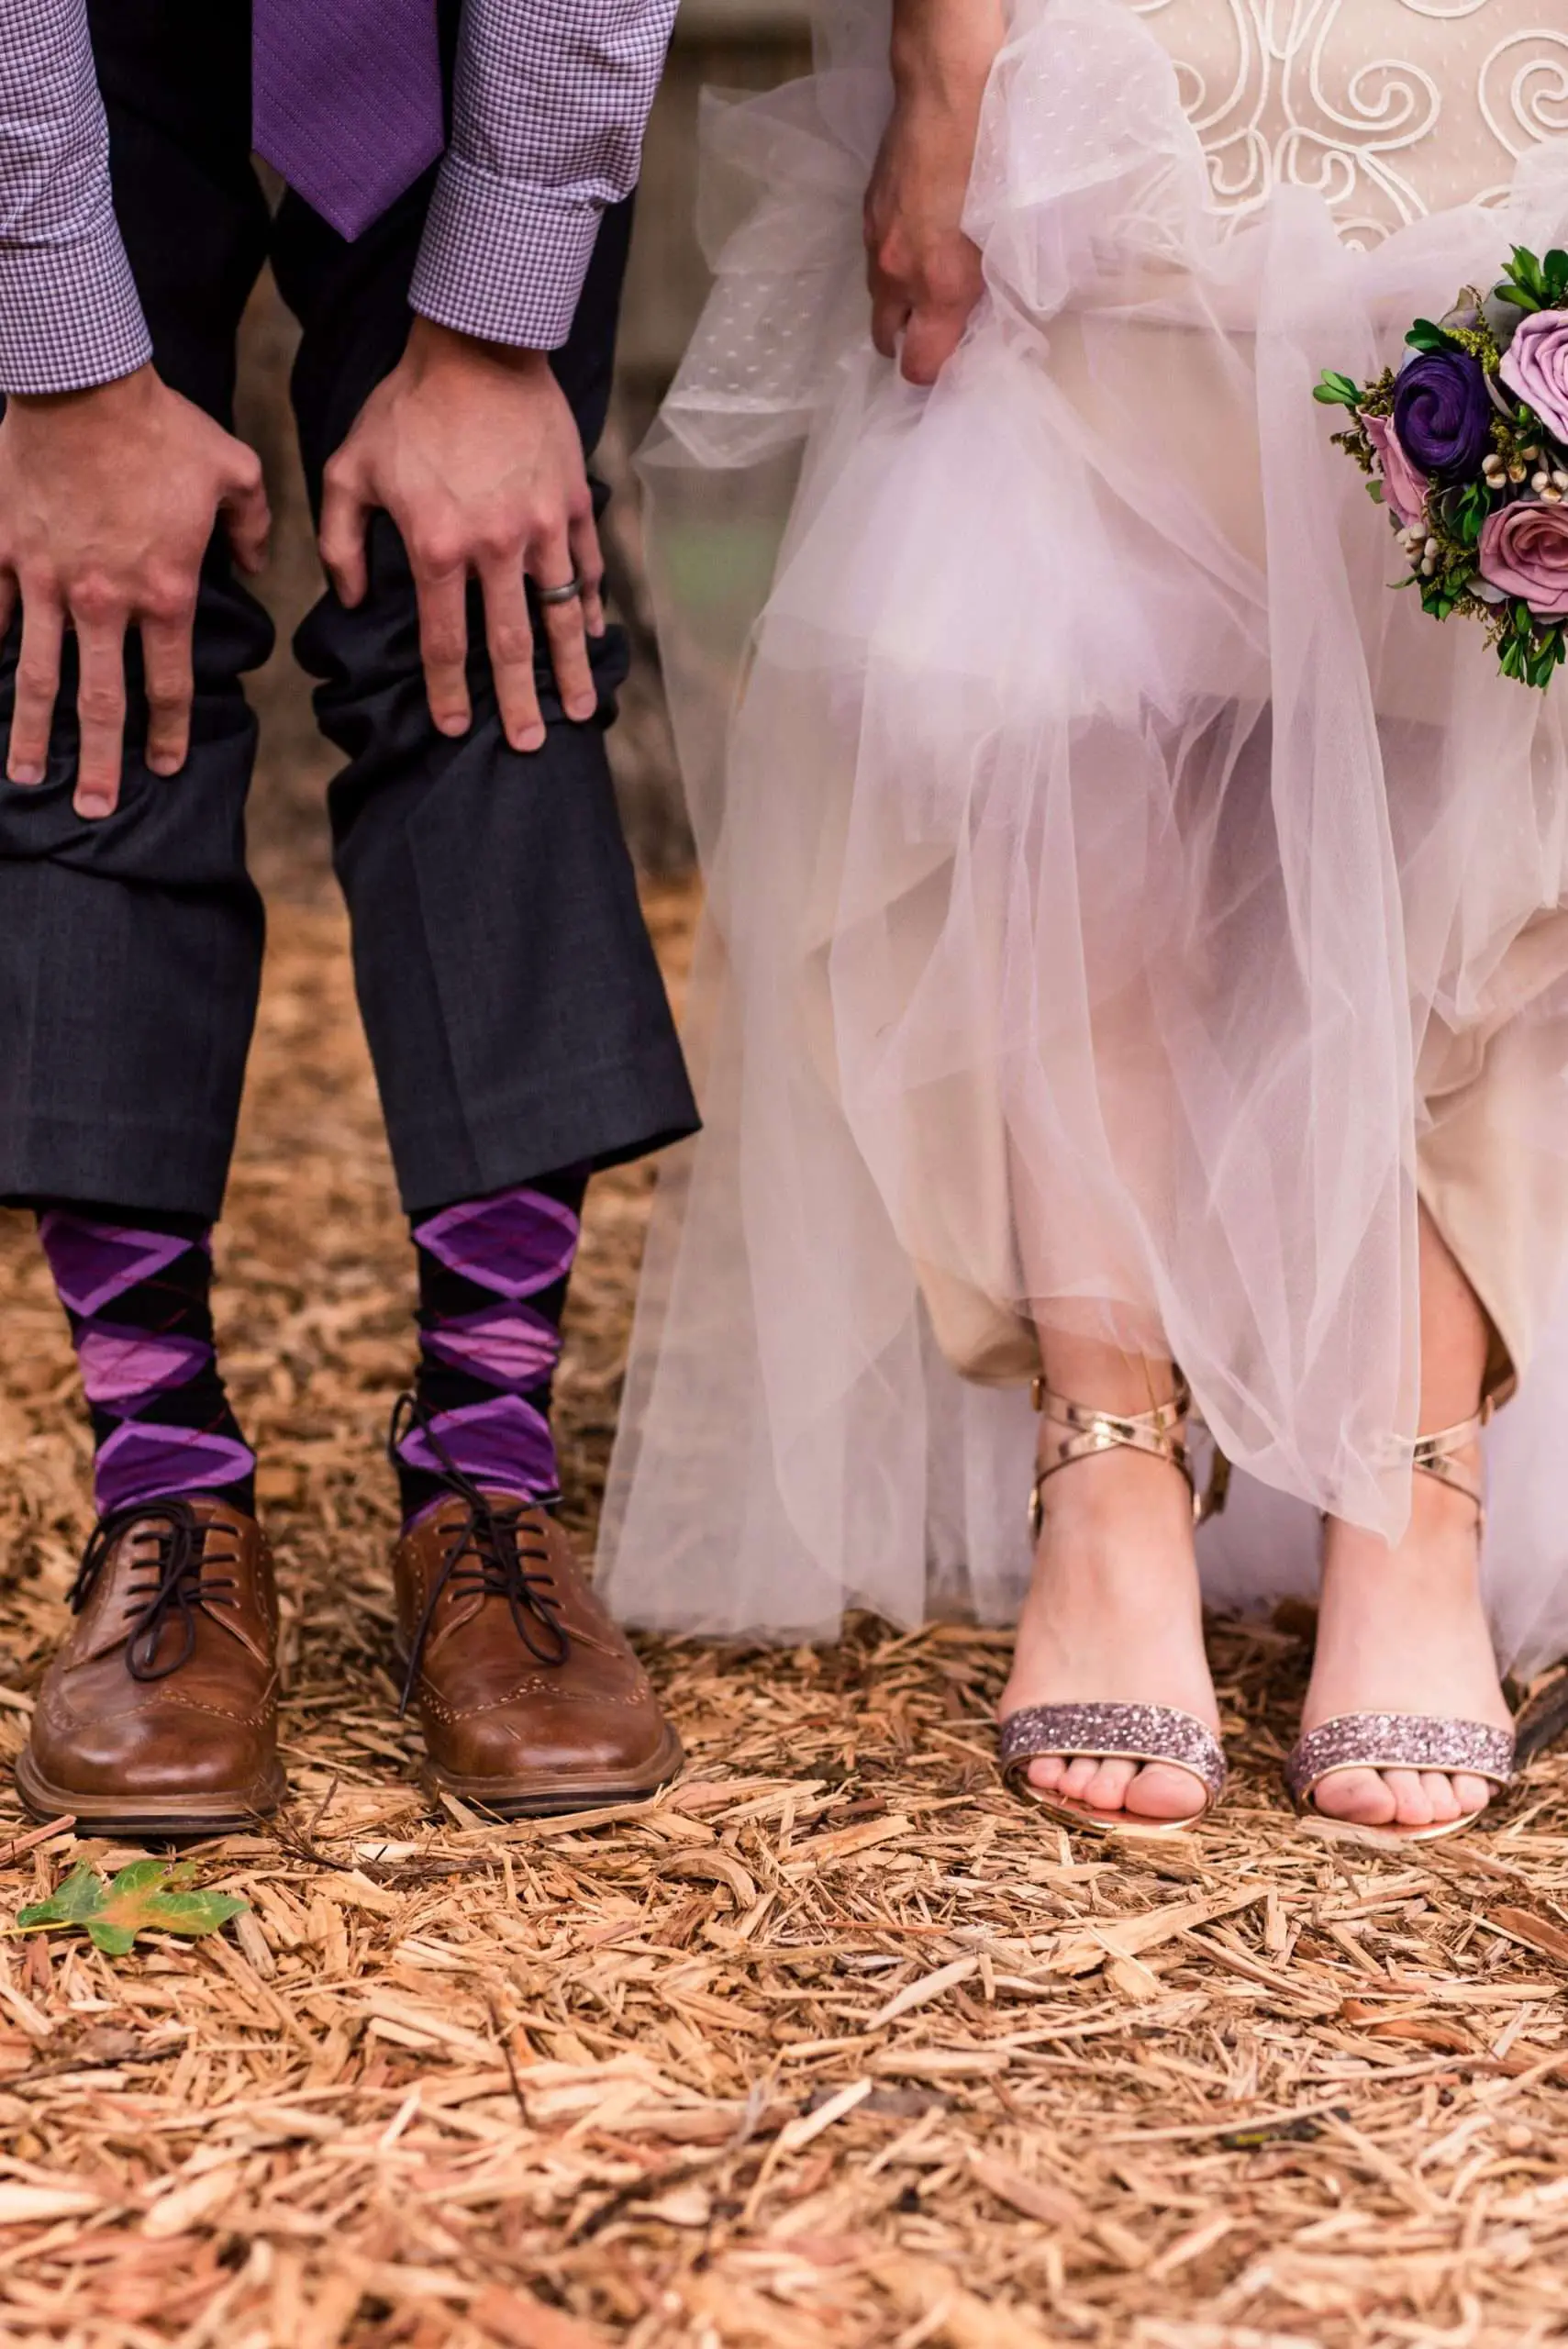 Anyone wear colorful shoes under their wedding dress?